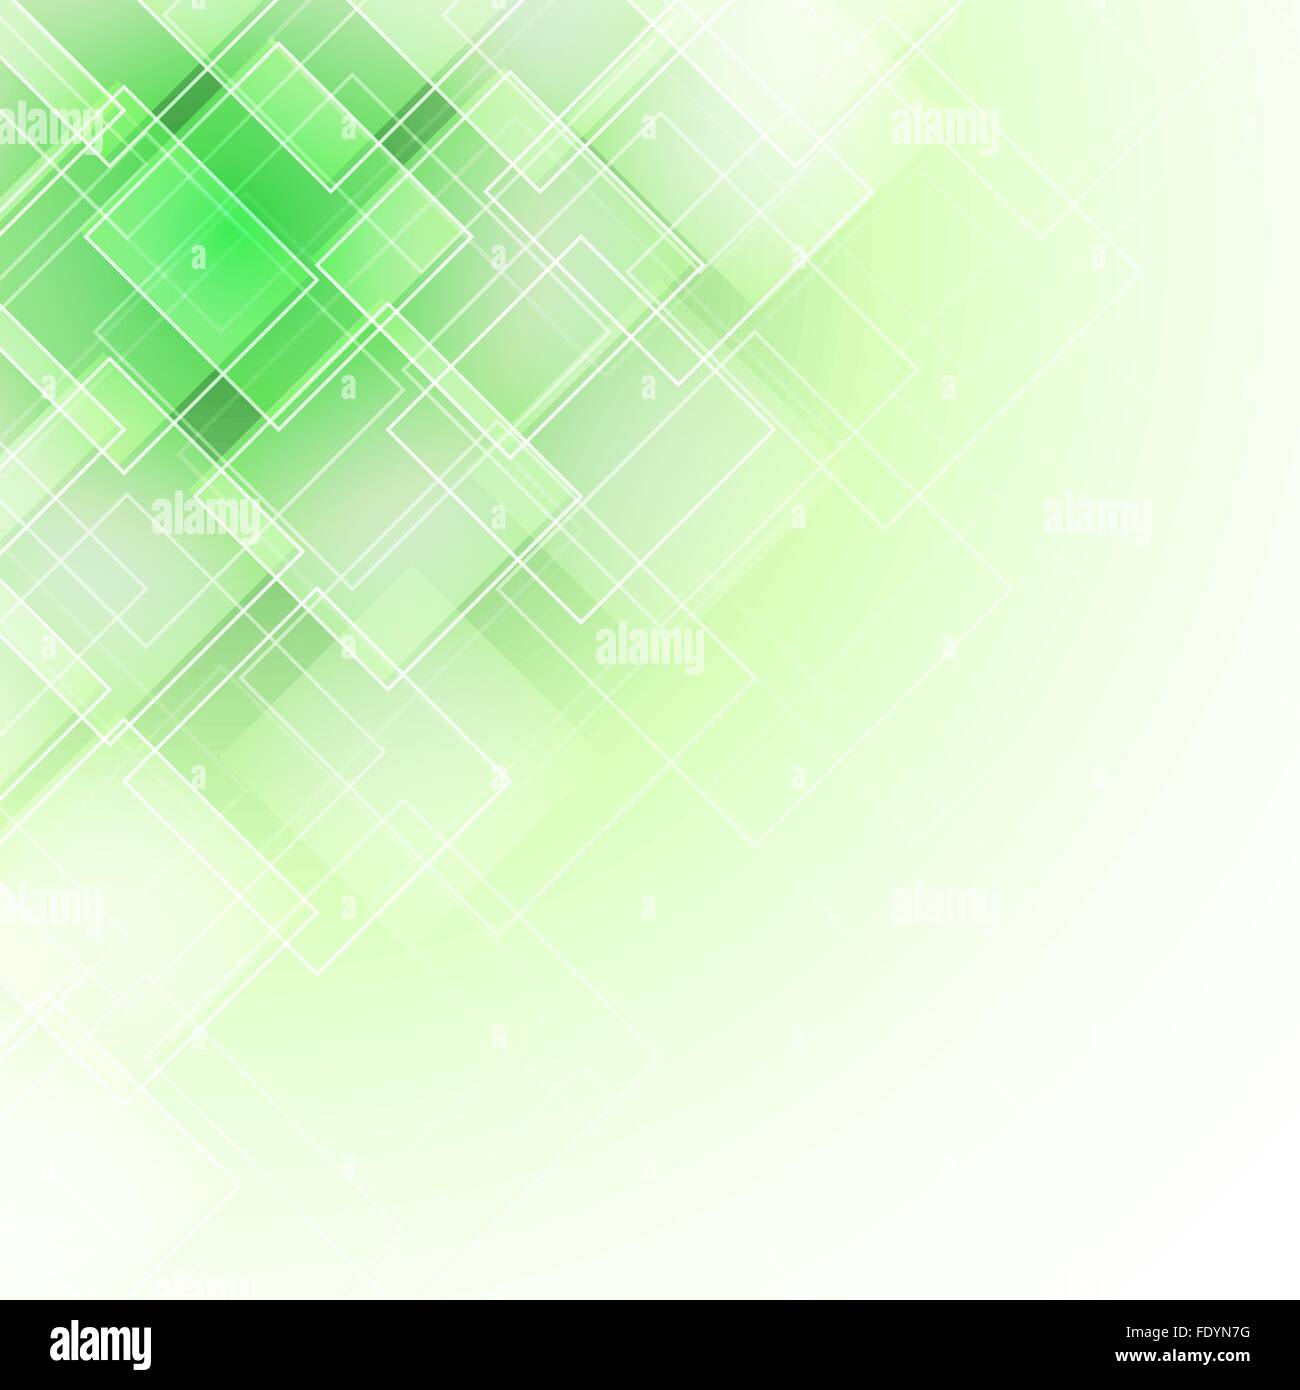 Background Abstract Green Wallpaper Vector Images (over 250,000)